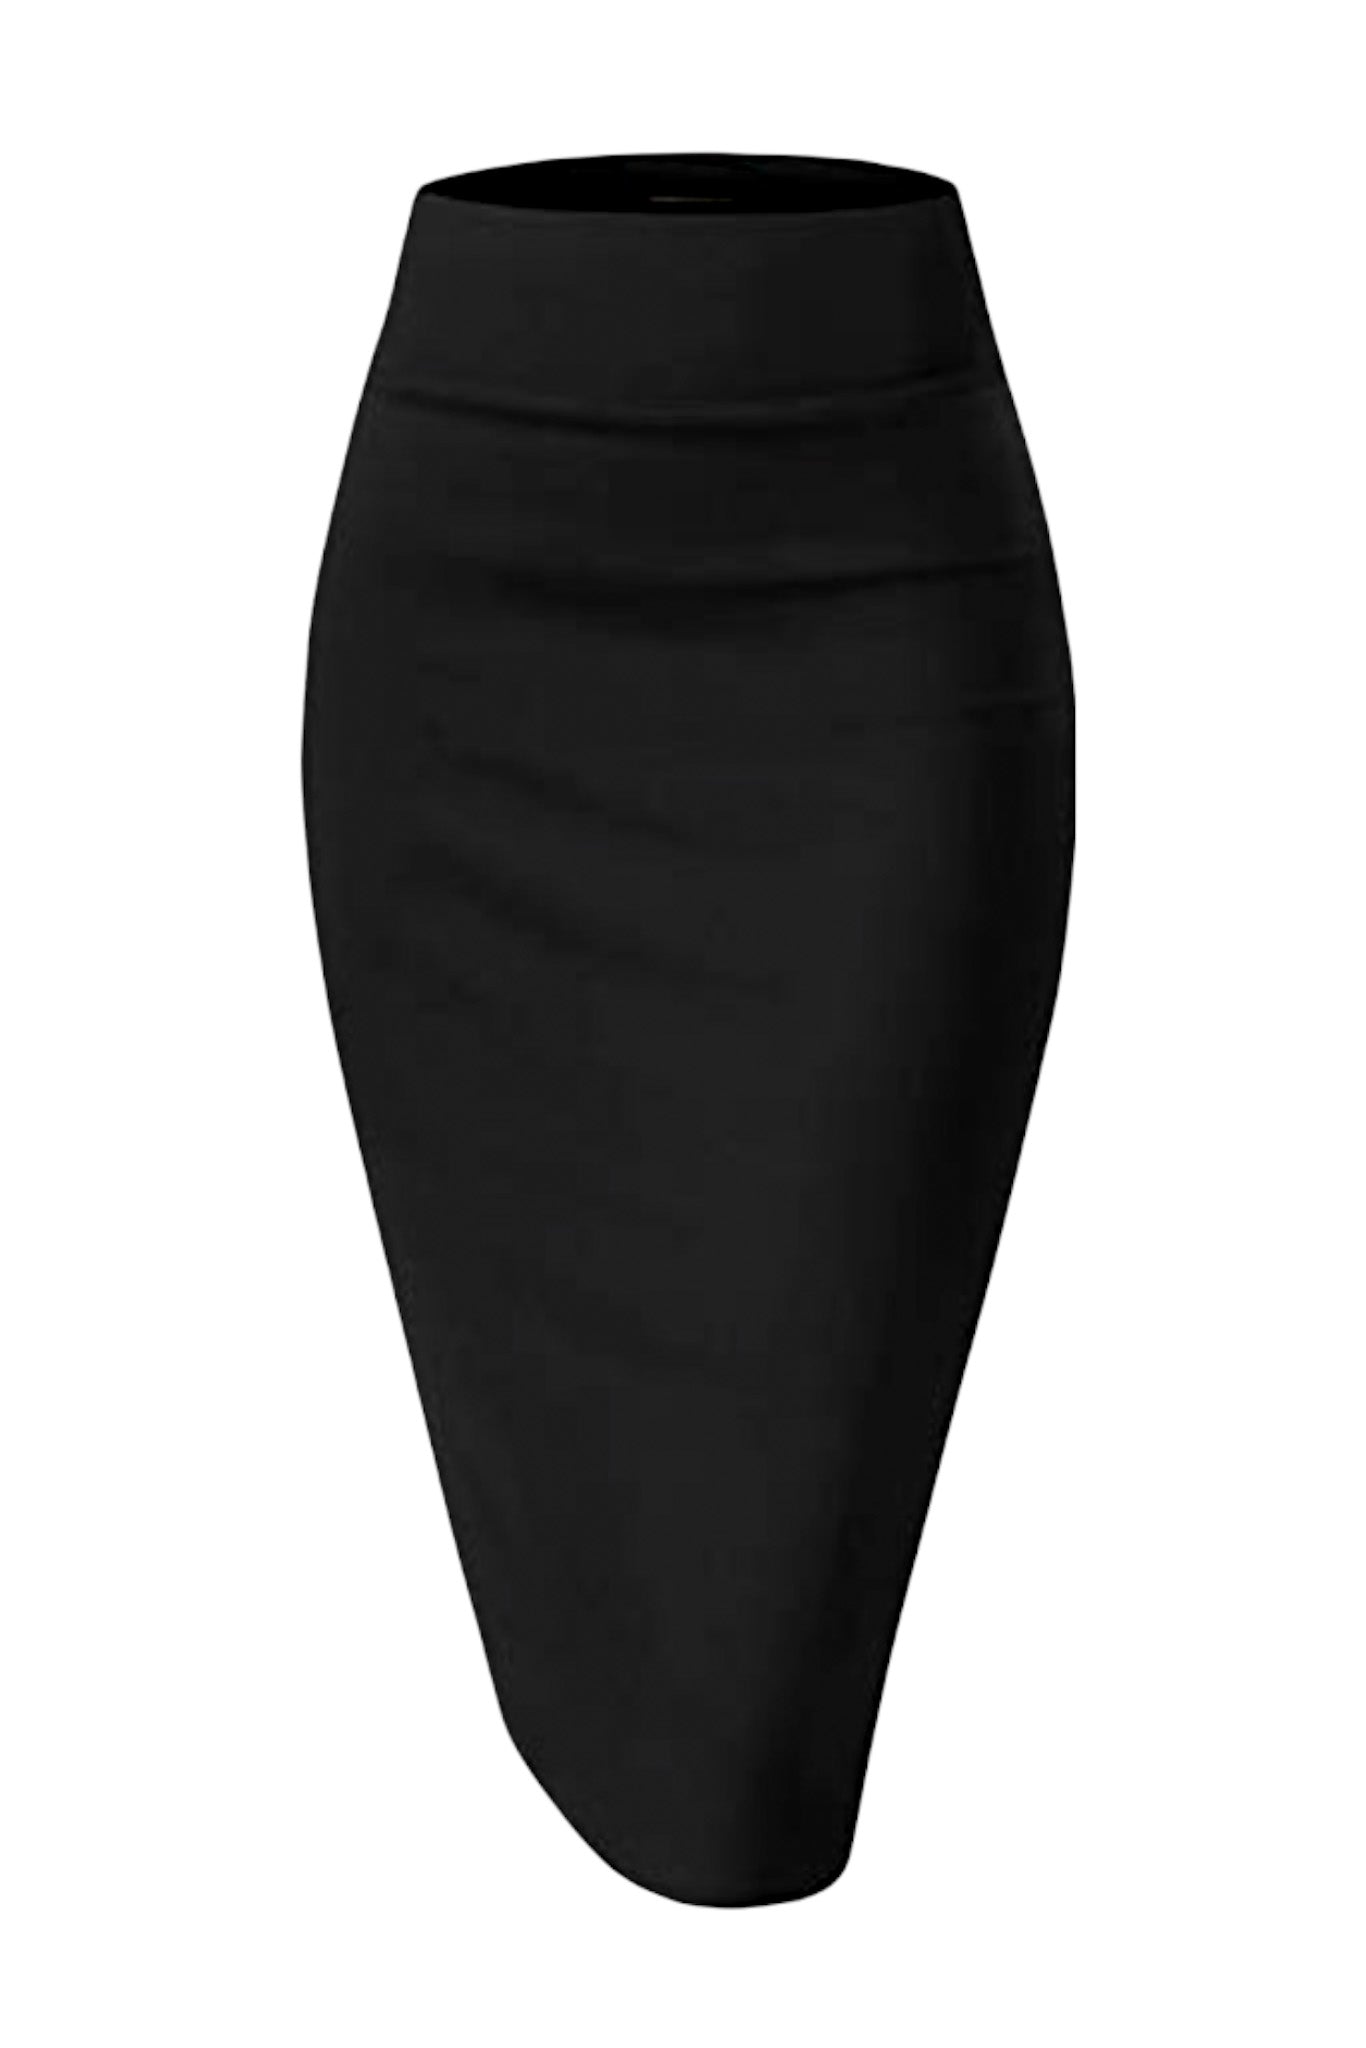 Load image into Gallery viewer, Glow Fashion Boutique Black Pencil Skirt
